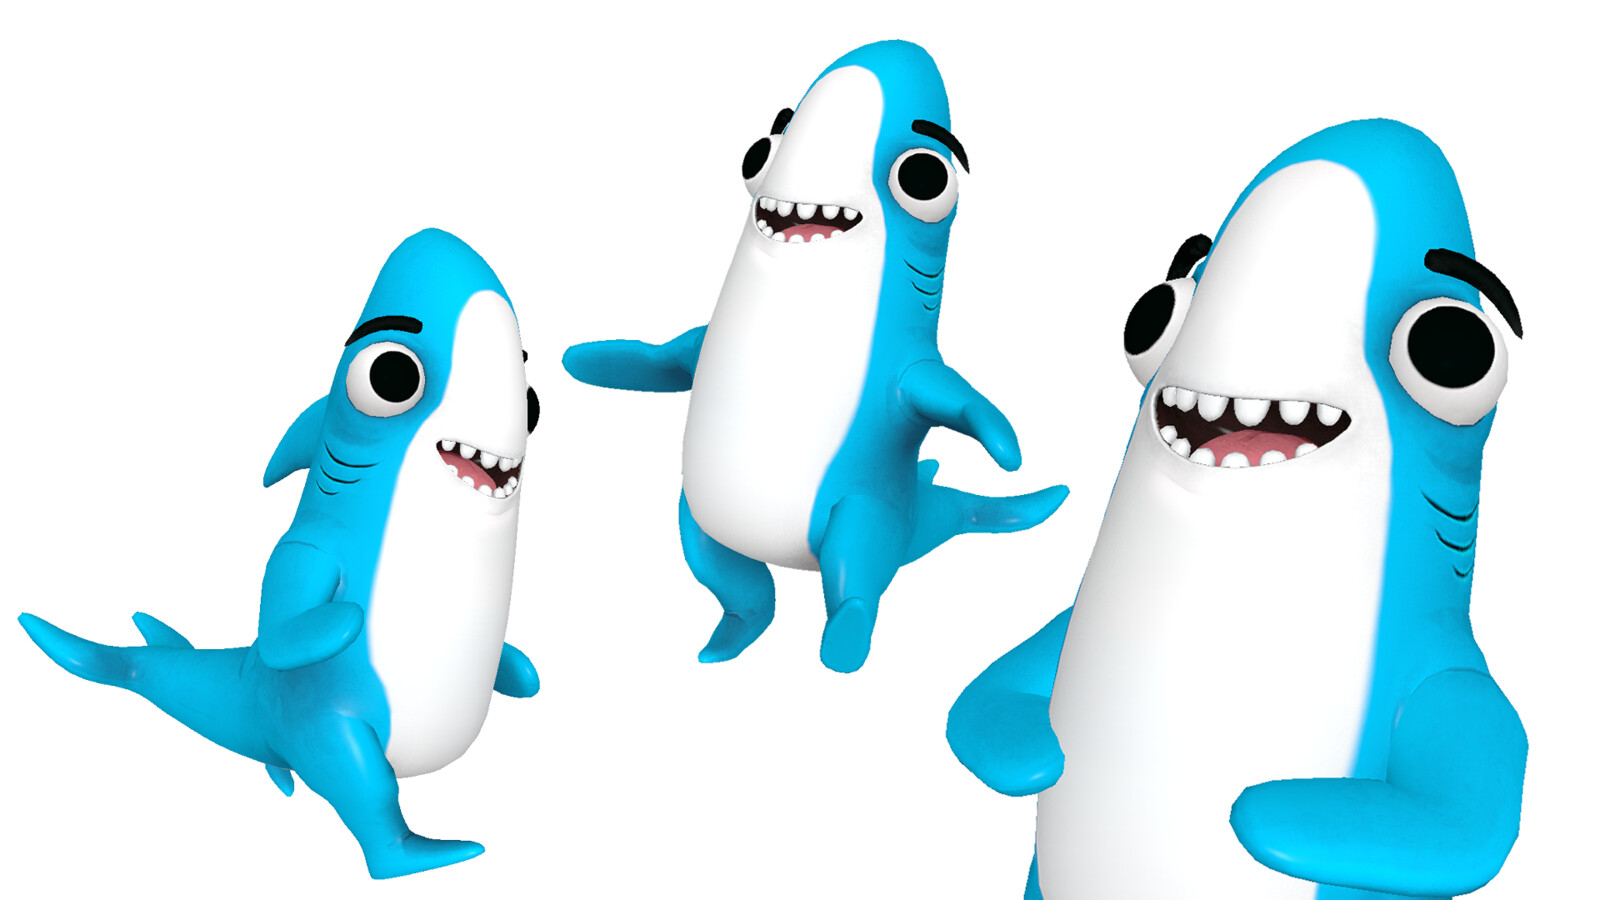 Sharky was the second character made for this project, he was much more ambitious than the previous character and I learned so much during the production and continued support of this model.